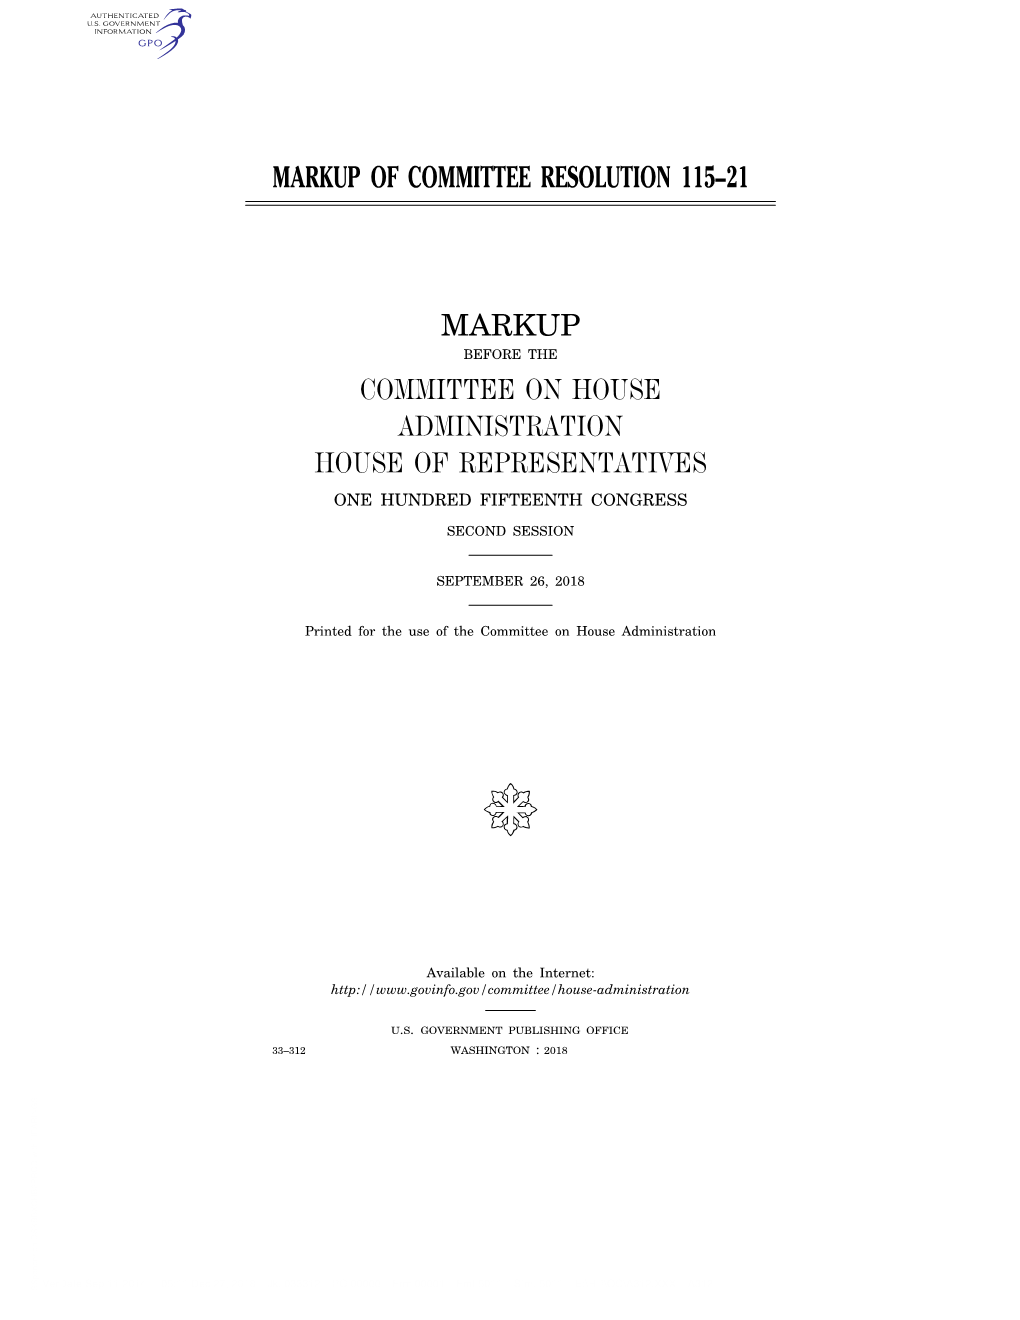 Markup of Committee Resolution 115–21